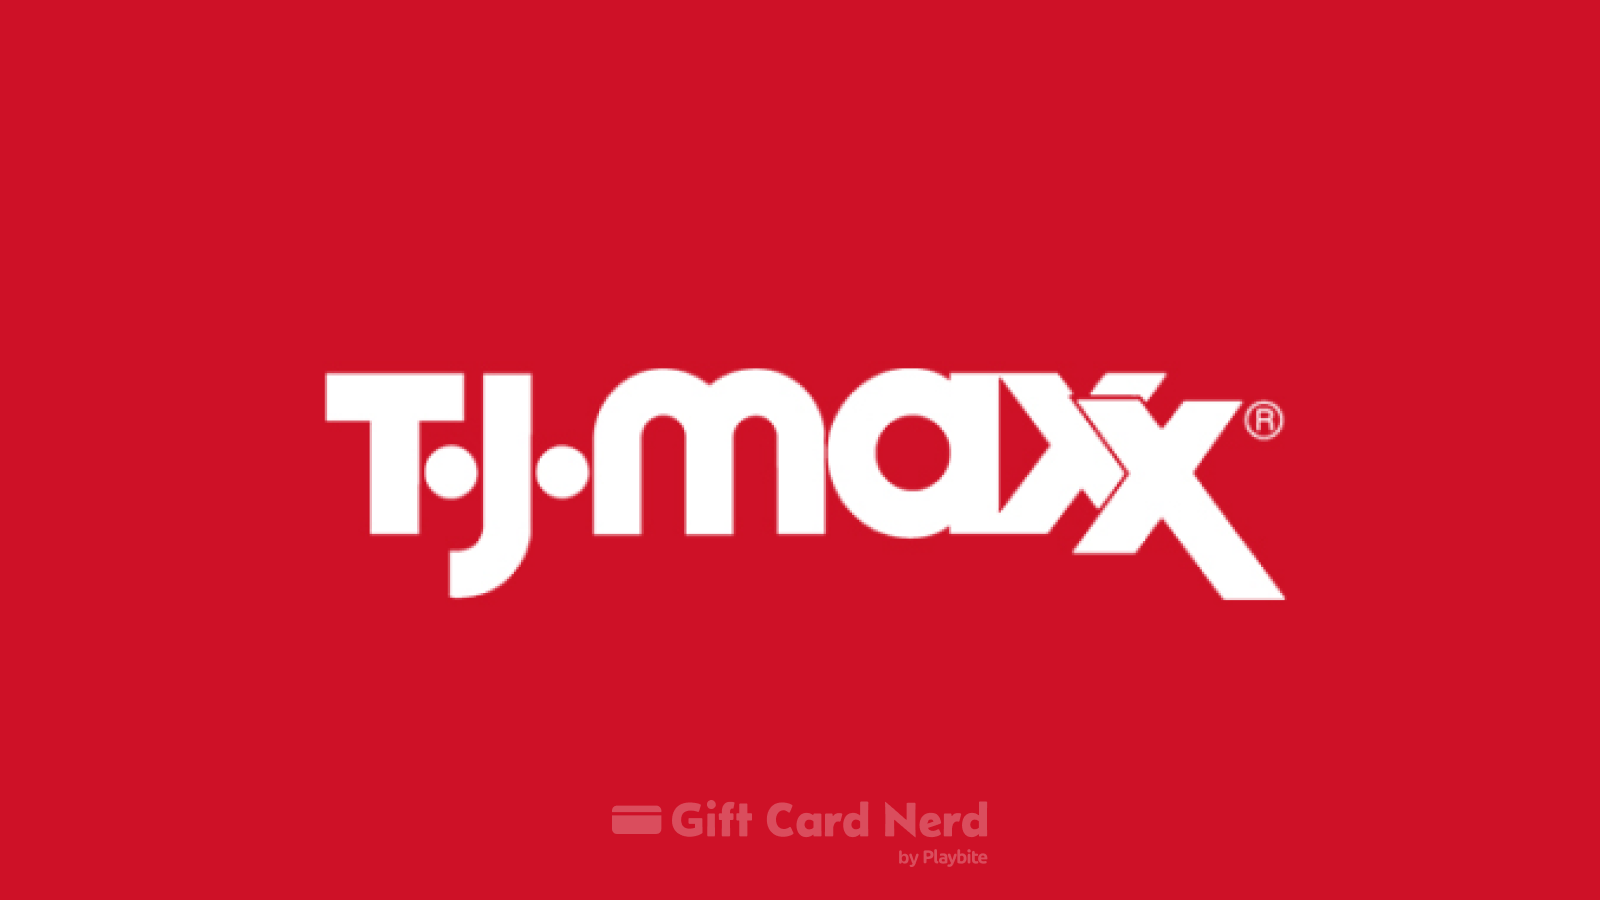 How to Check Your TJ Maxx Gift Card Balance